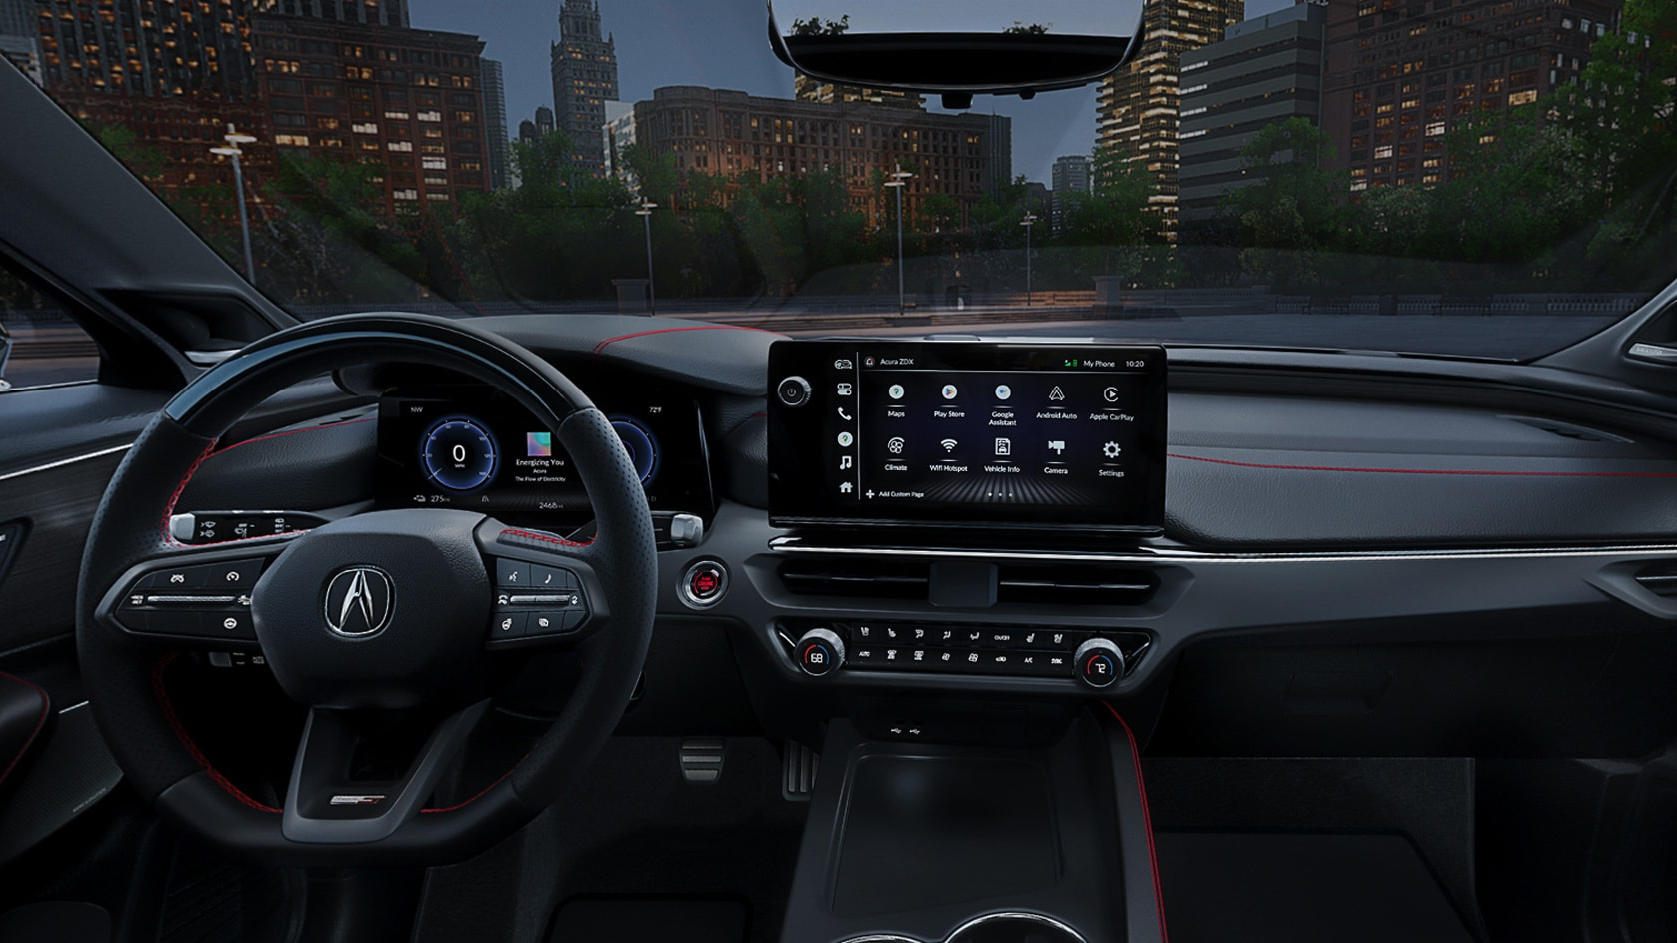 Internal marketing photo of the Acura ZDX SUV. The EV’s interior shows the center display, steering wheel and other dash features.